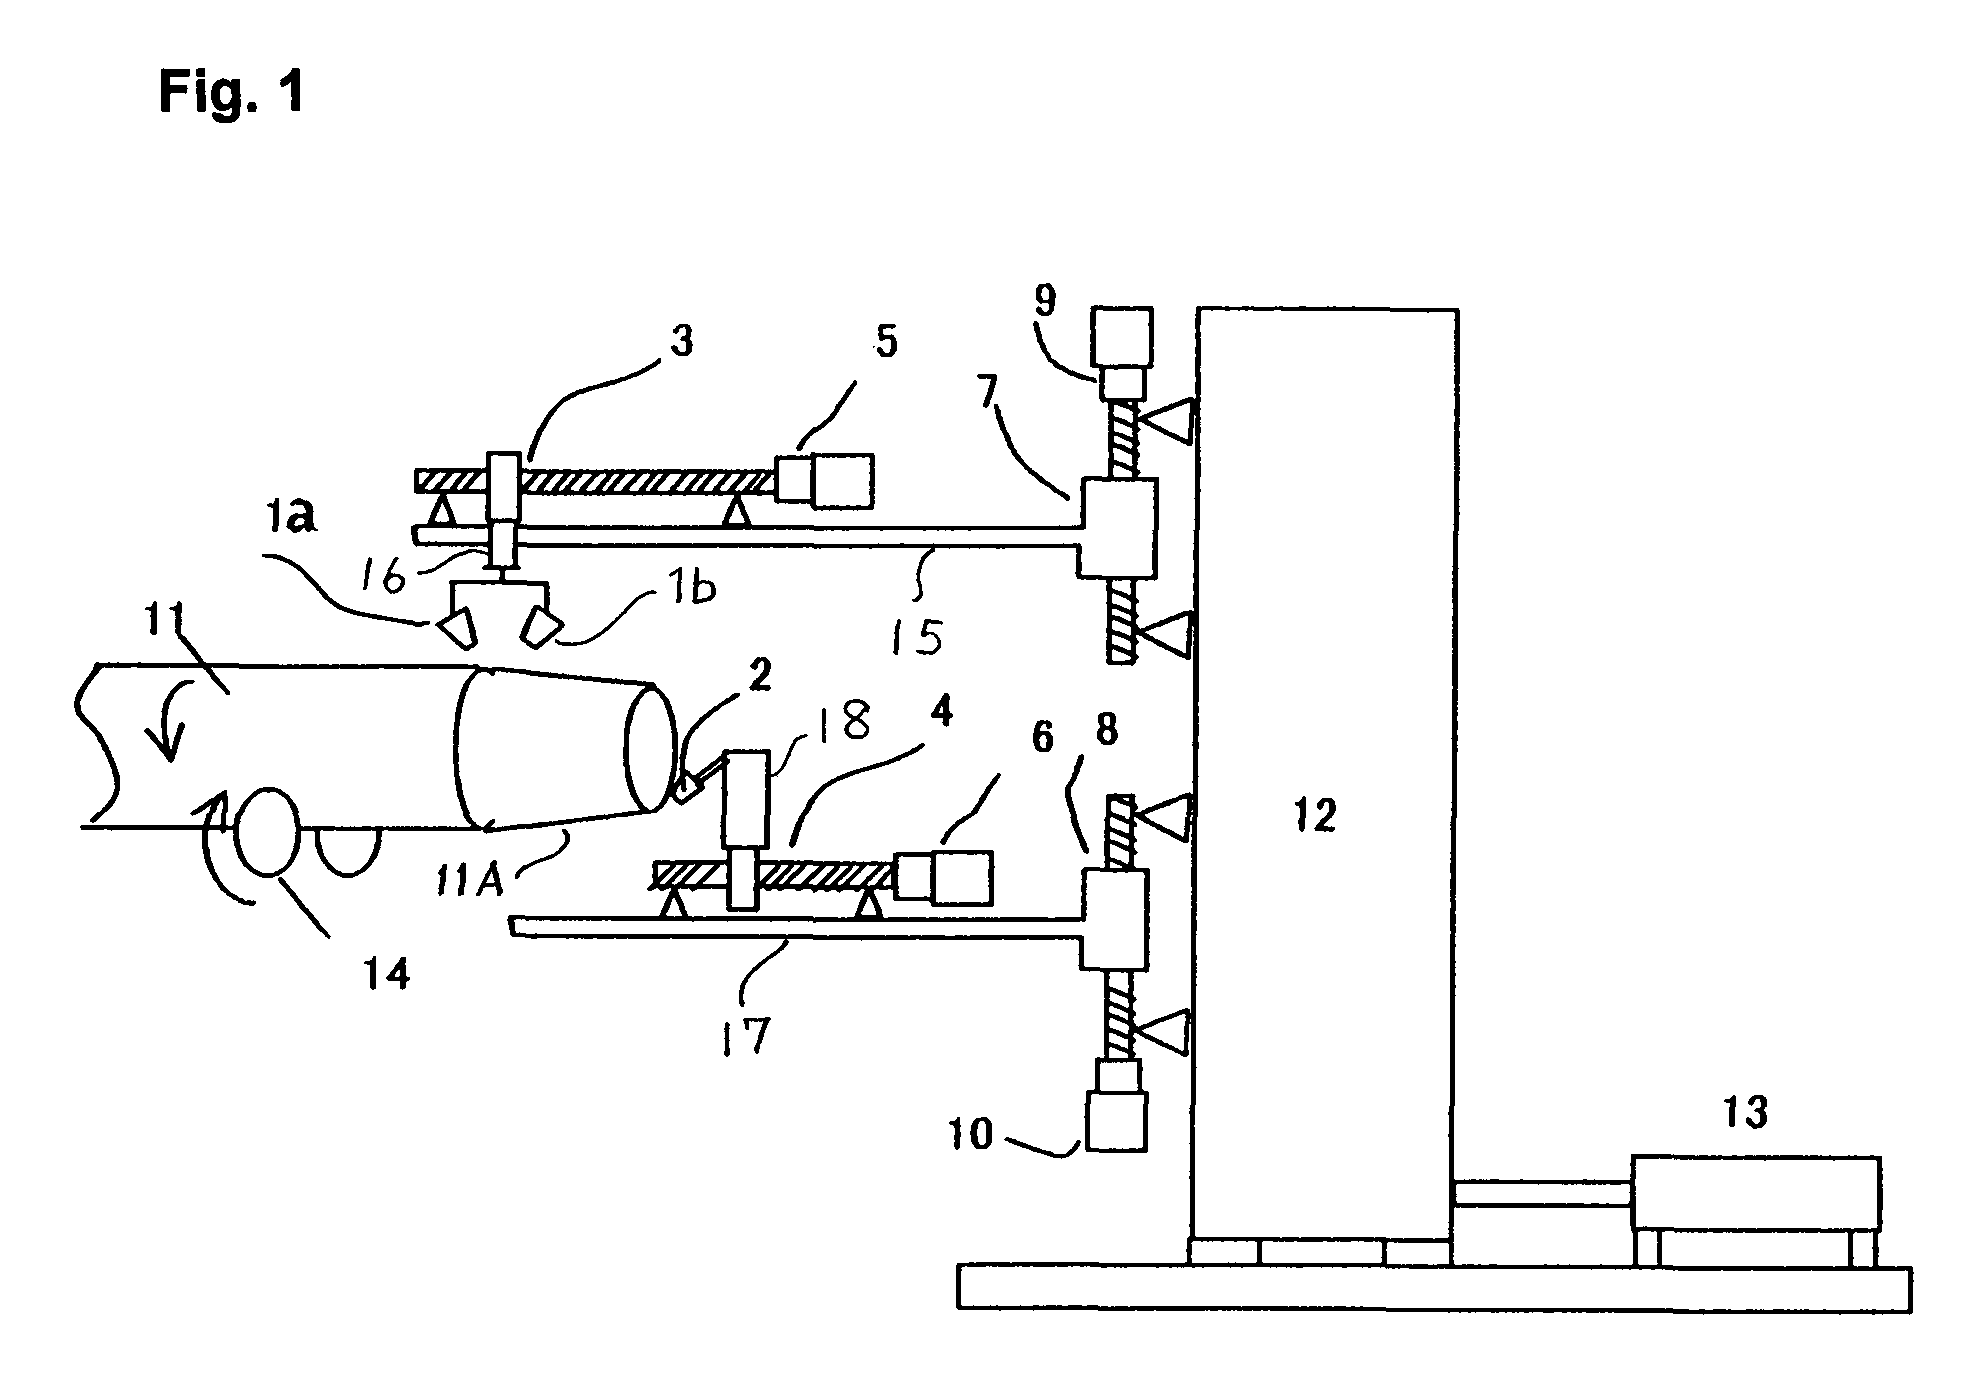 Coating apparatus for applying a UV curable resin to a threaded end of a steel pipe